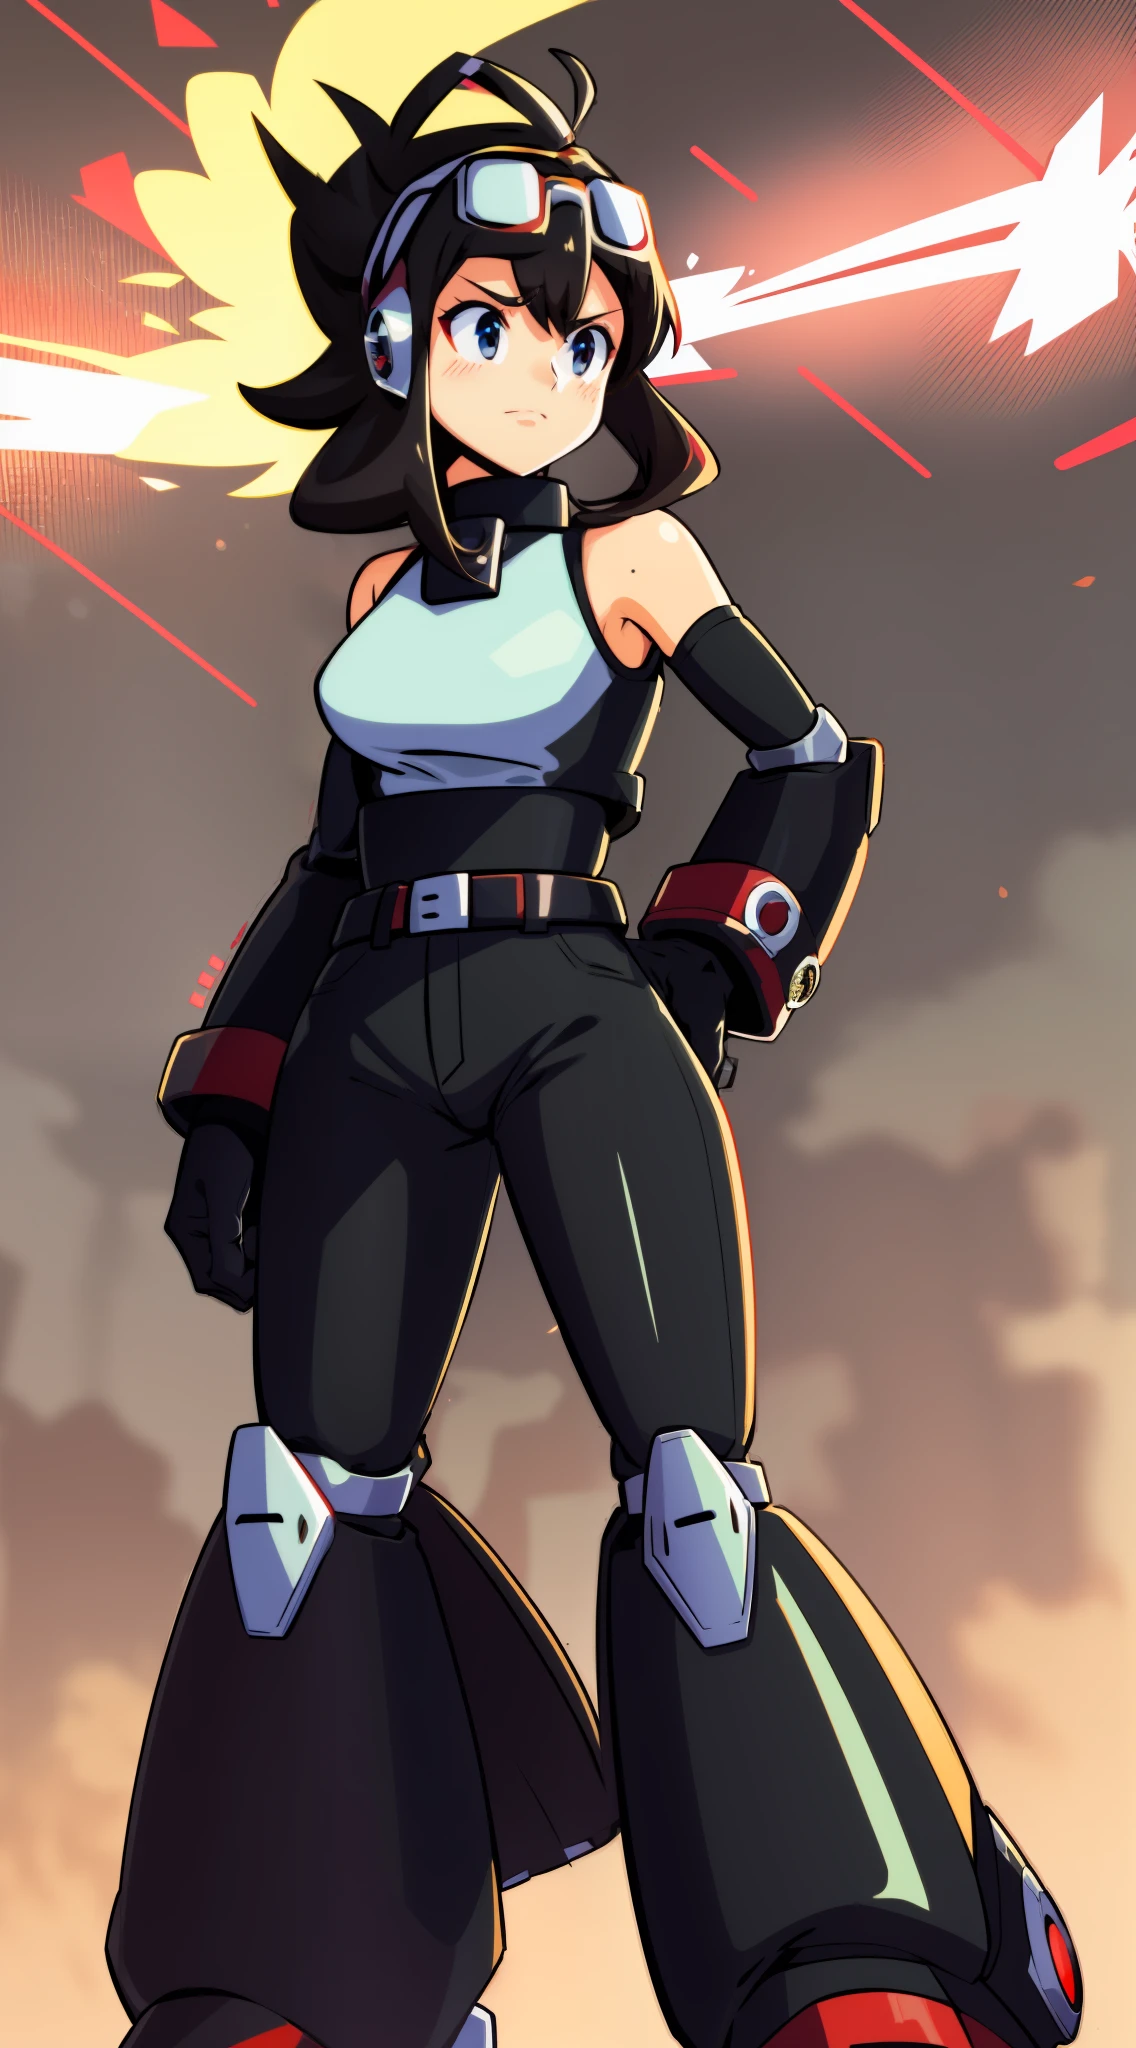 1Girl, Heavily red and white armored, gloves, skirt, heavy black cybernetic boots, heavy cybernetic Red with white trim arms with Black Bracelets, heavy cybernetic red torso with sleeveless black jacket, waist belt, megamanX red and white heavy armor, long black pony tail, red and black trim aviator goggles on forehead, heavy thick black hair, metallic red skirt, large sleeveless Black jacket, red armor with white trim, wearing sleeveless biker jacket, wearing thick/wide black wristbands, punk pose, hands near hips, two-tone white and red gloves, long black/brown ponytail, big sleeveless jacket